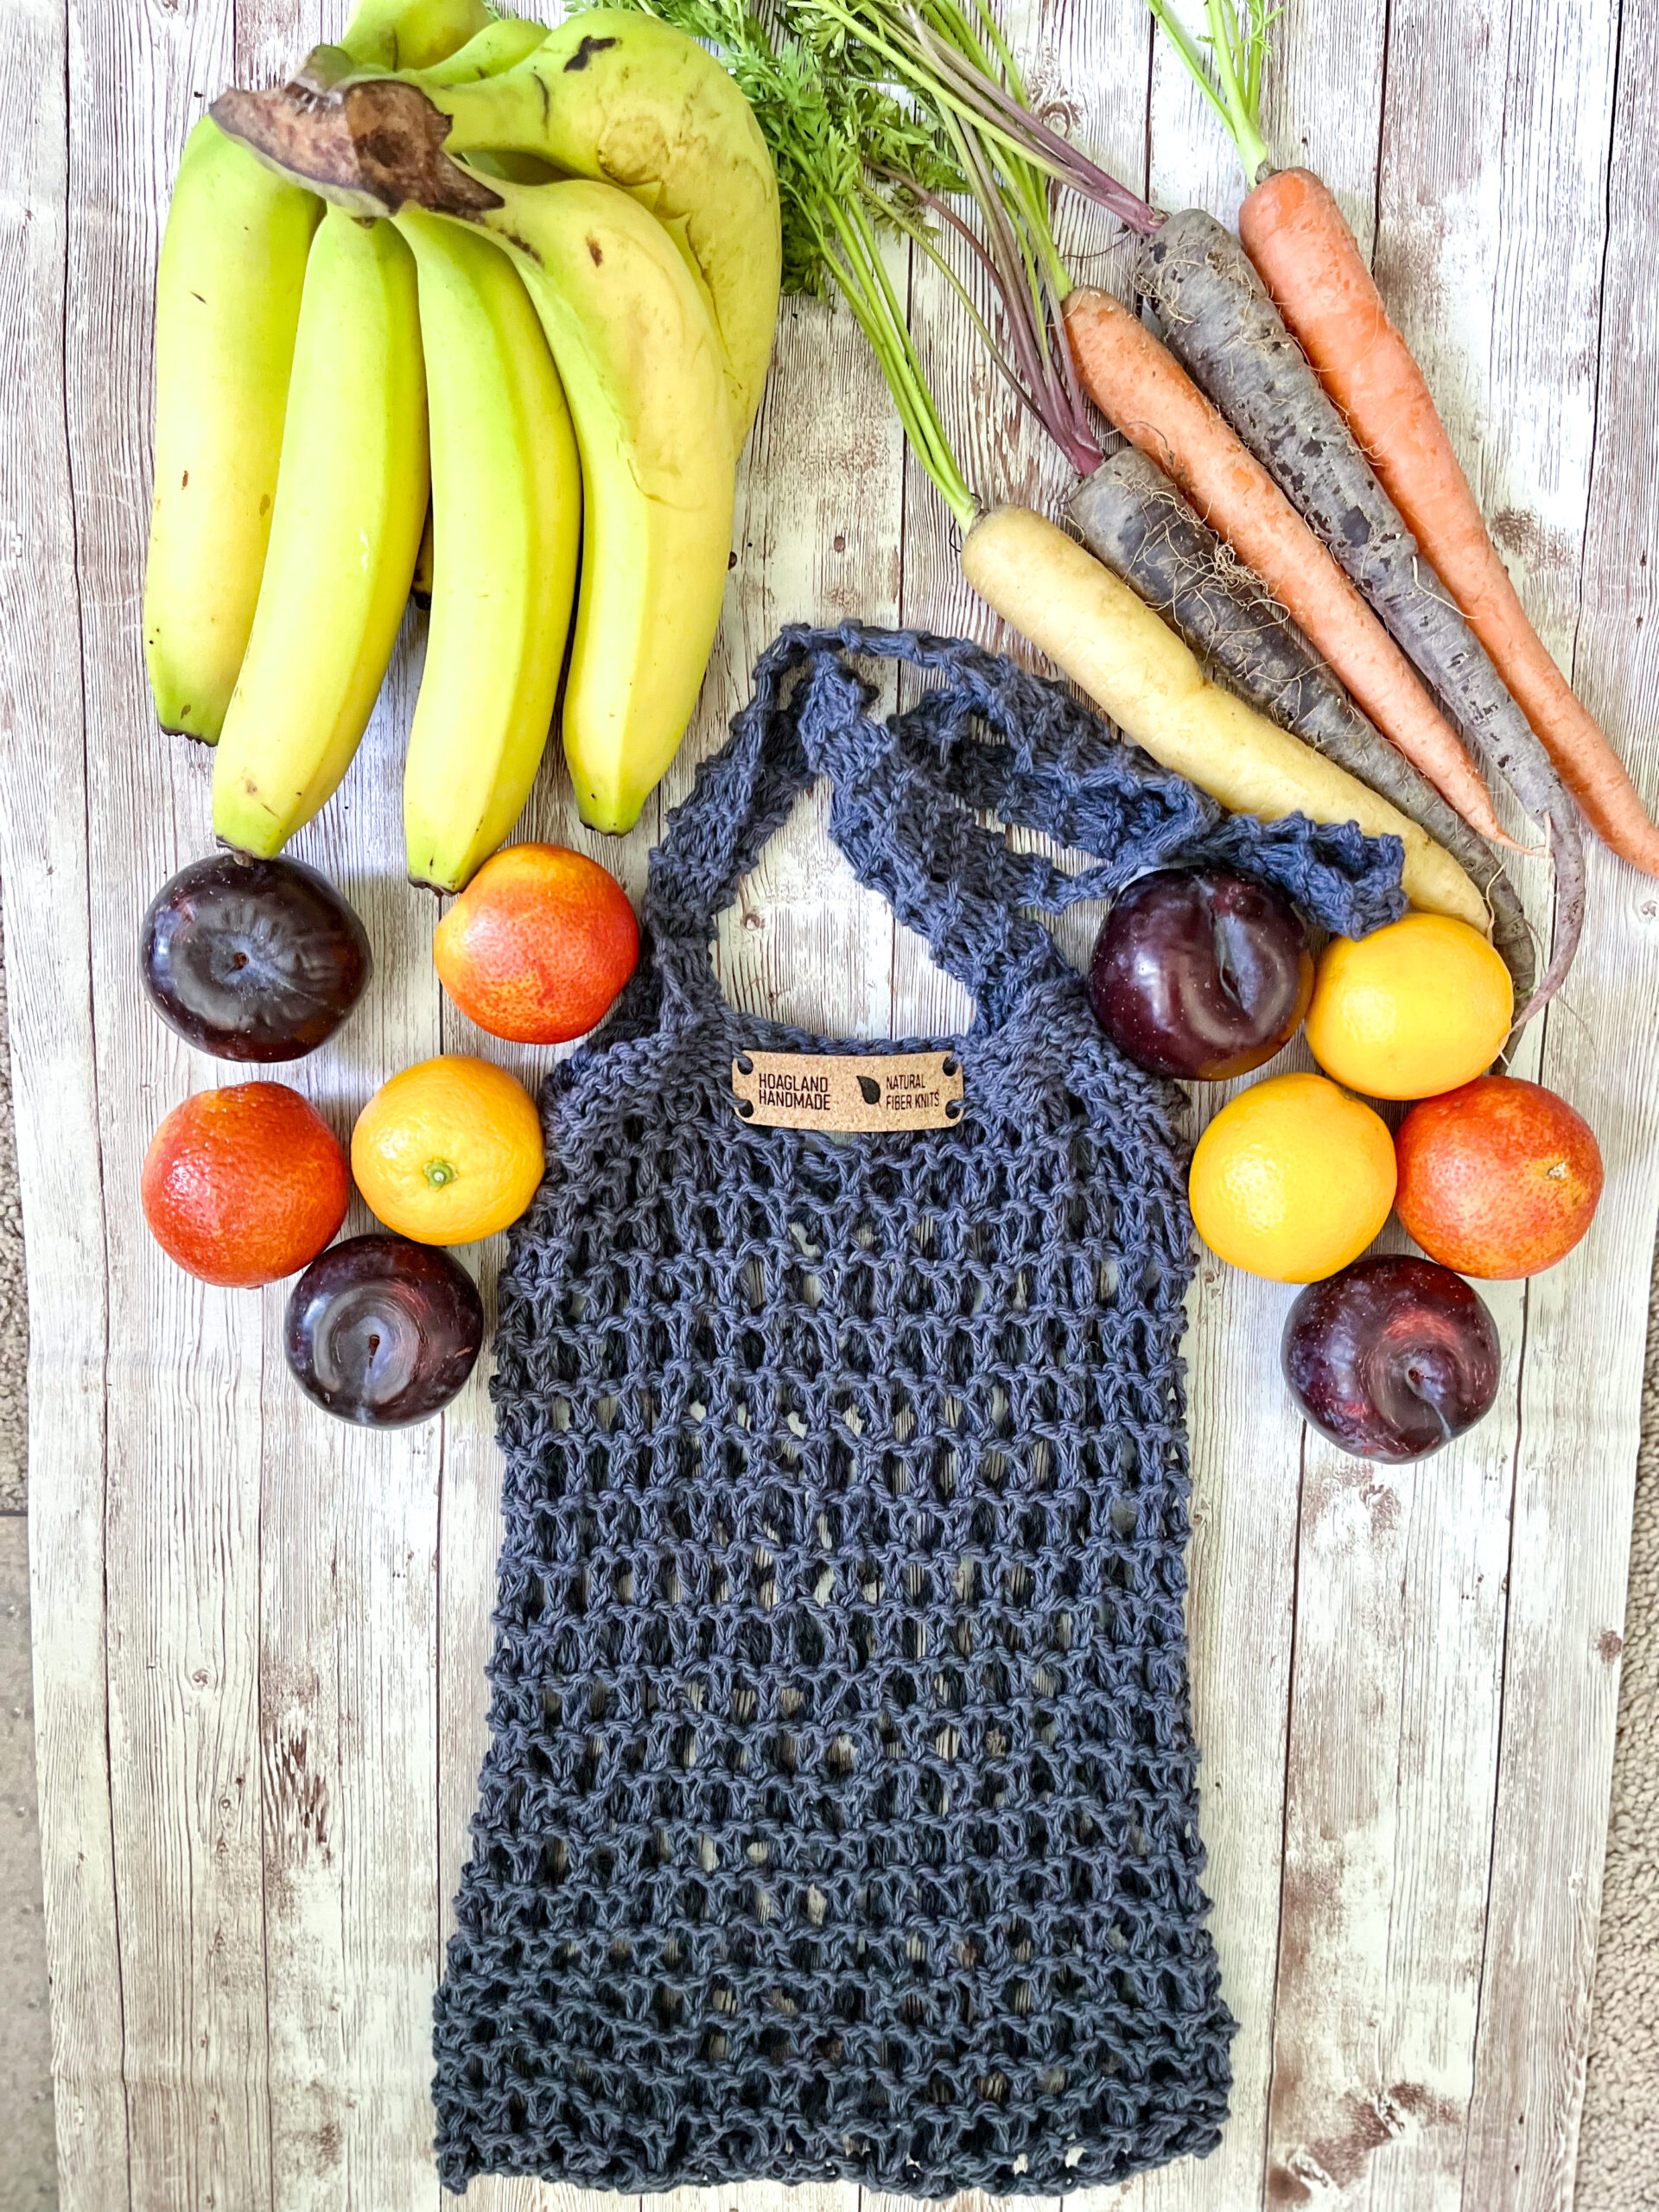 A dark blue recycled cotton mesh tote bag is surrounded by bananas, rainbow carrots, plums, oranges, and blood oranges